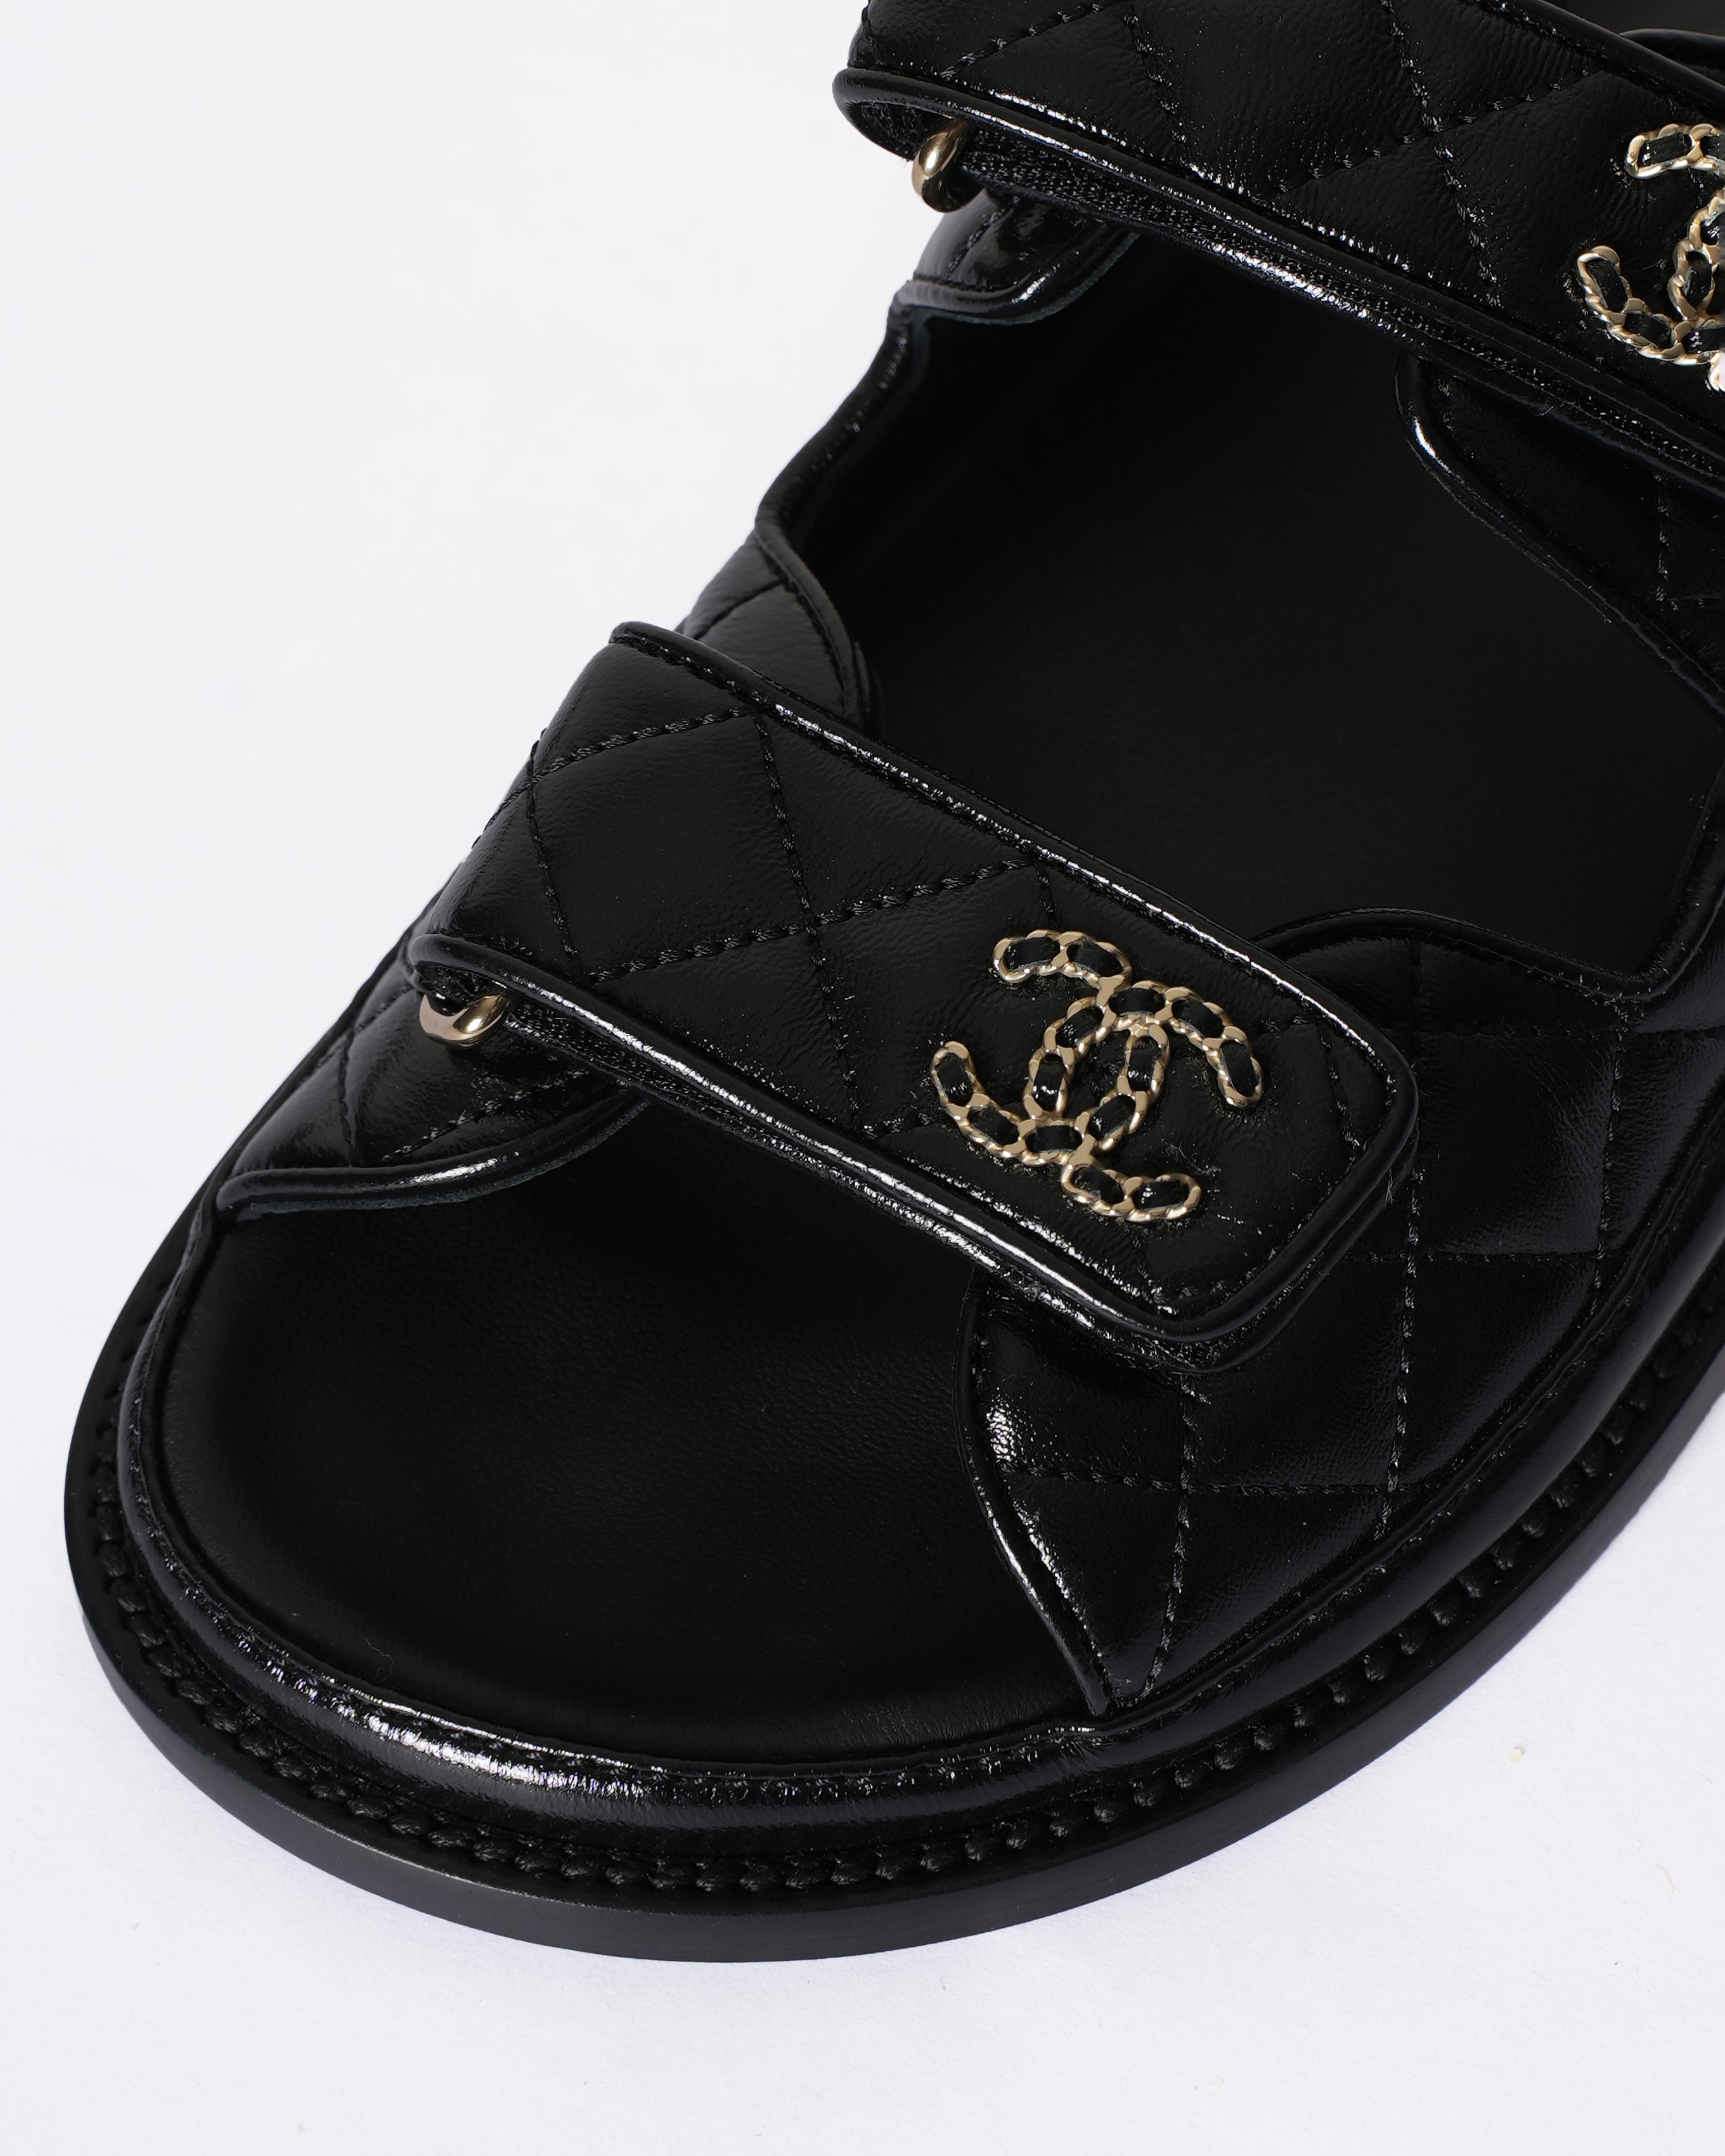 New Chanel Dad Black Leather Sandals